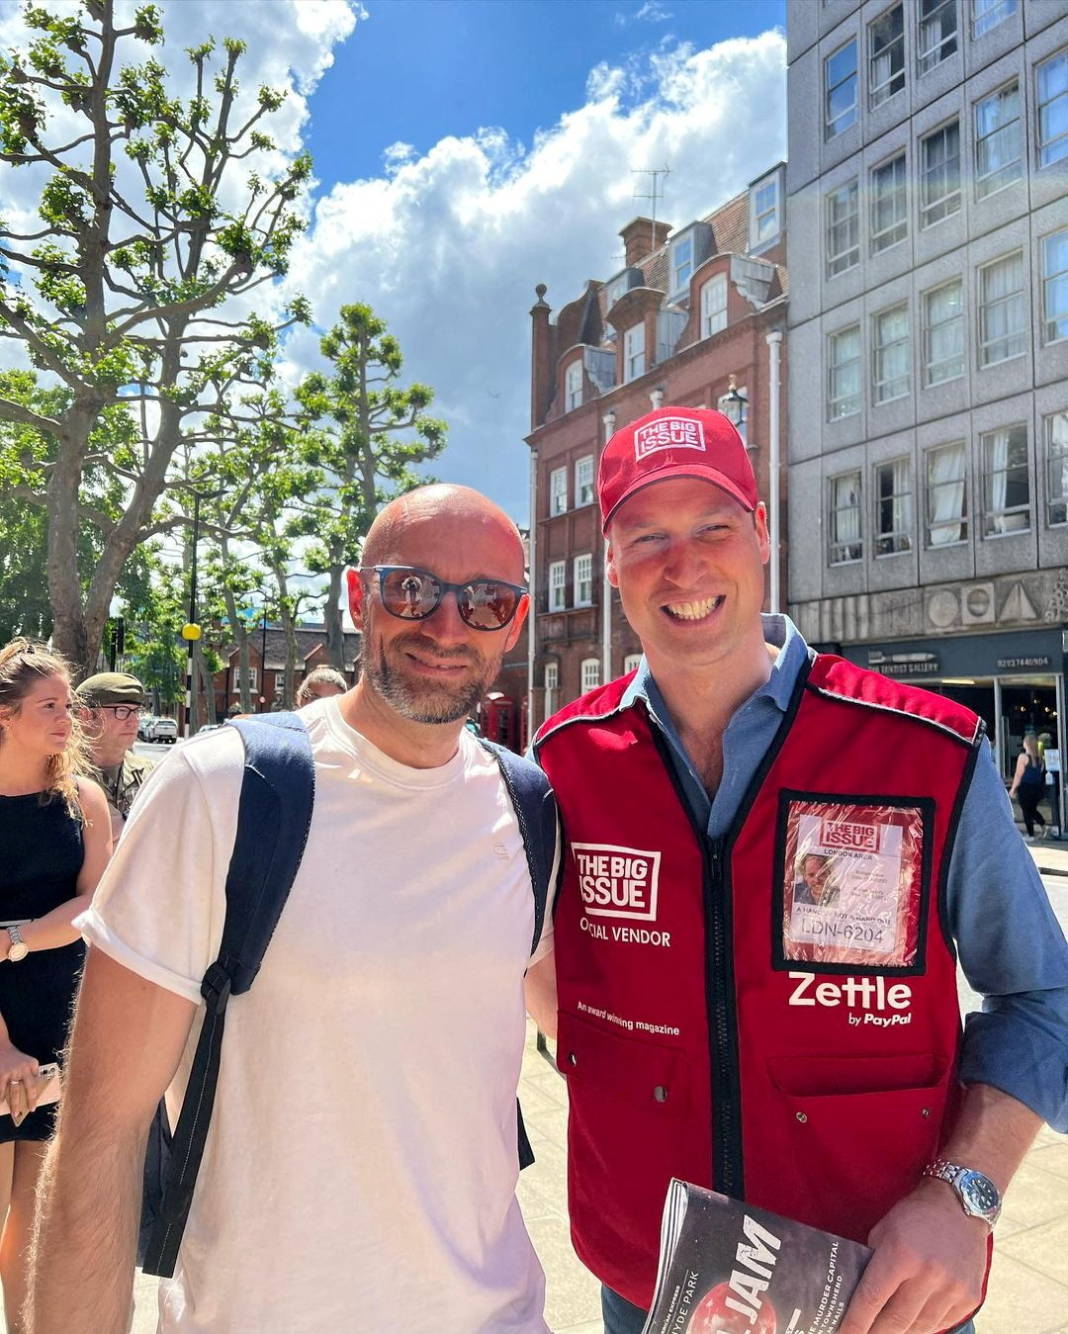 Vitalijus Zuikauskas Poses For A Picture With Britain's Prince William, Who Was Spotted Selling The Big Issue Newspaper In London